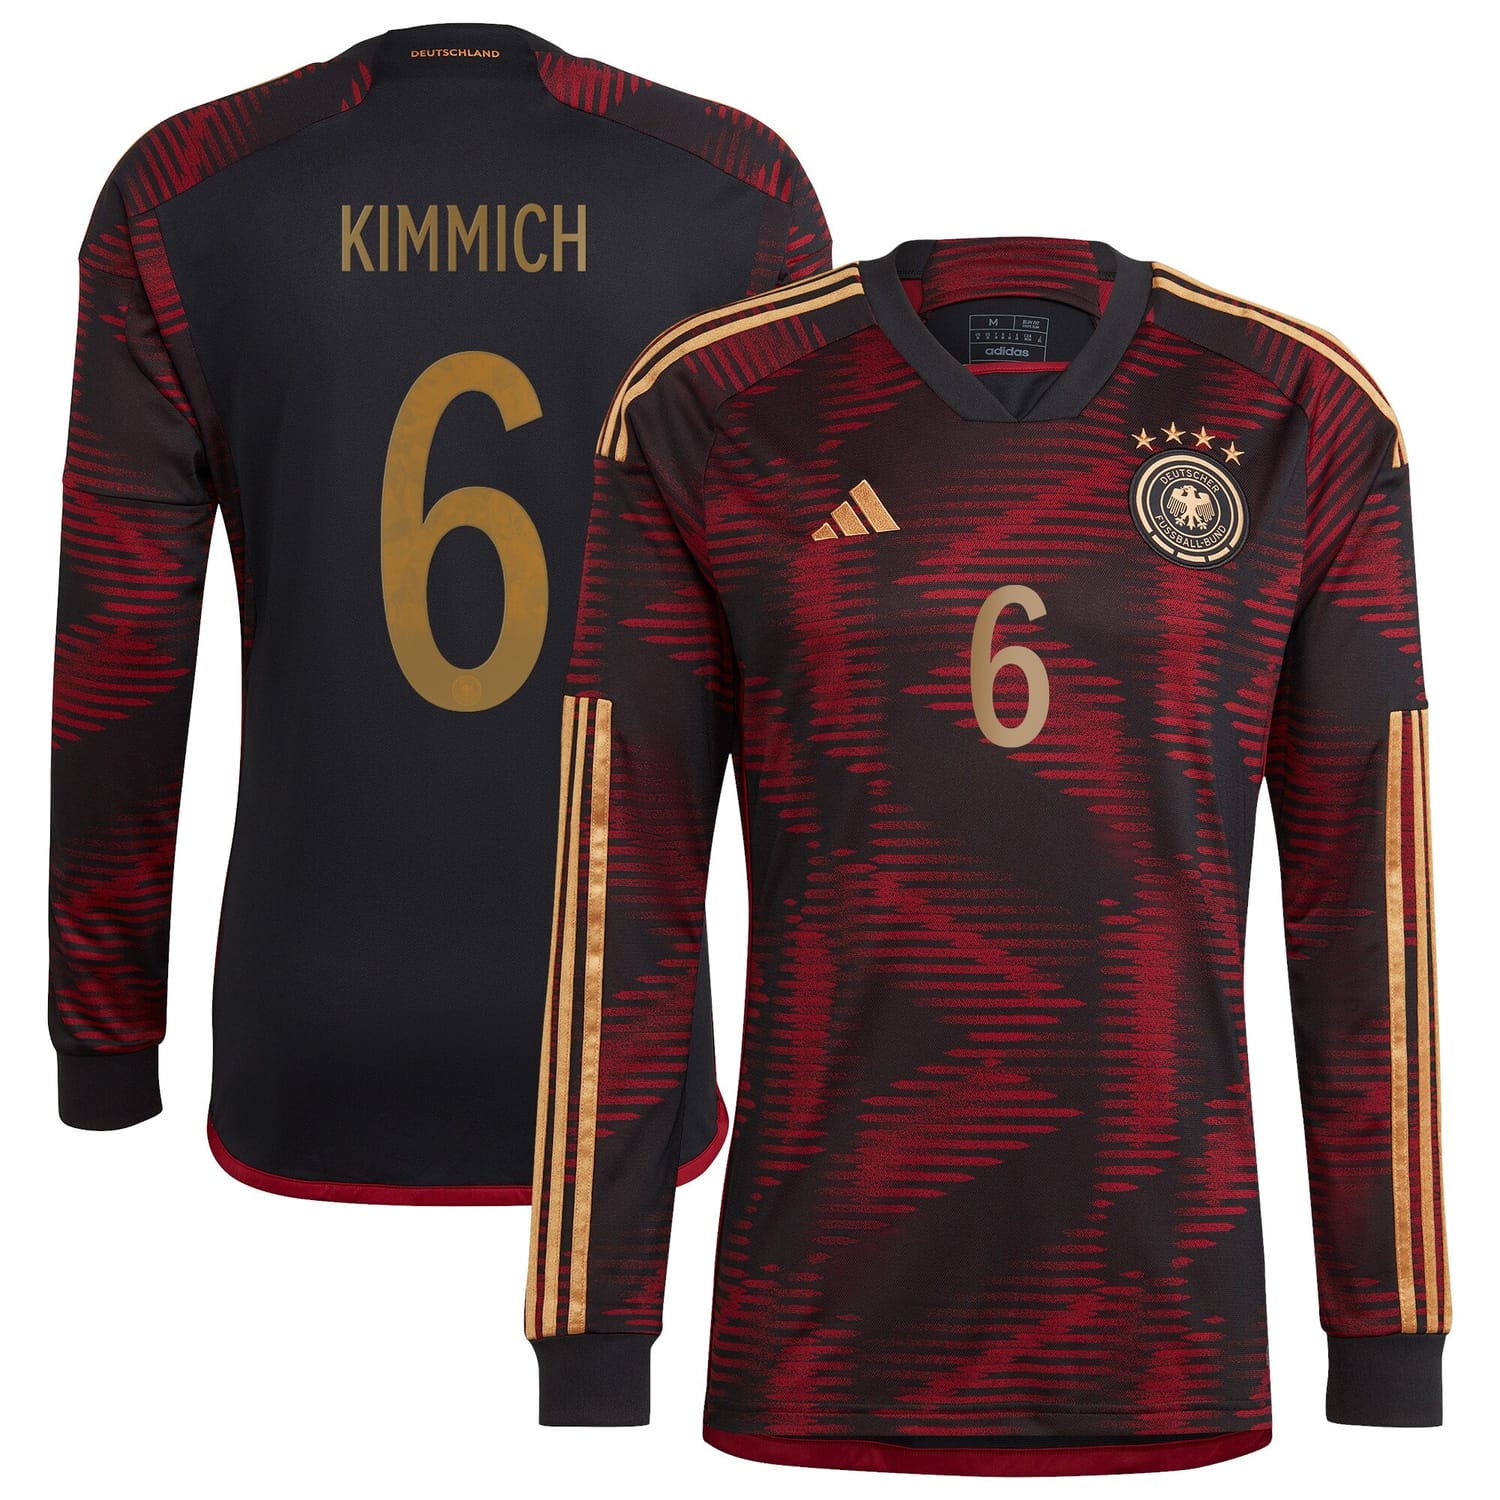 Germany National Team Away Jersey Shirt Long Sleeve player Joshua Kimmich 6 printing for Men